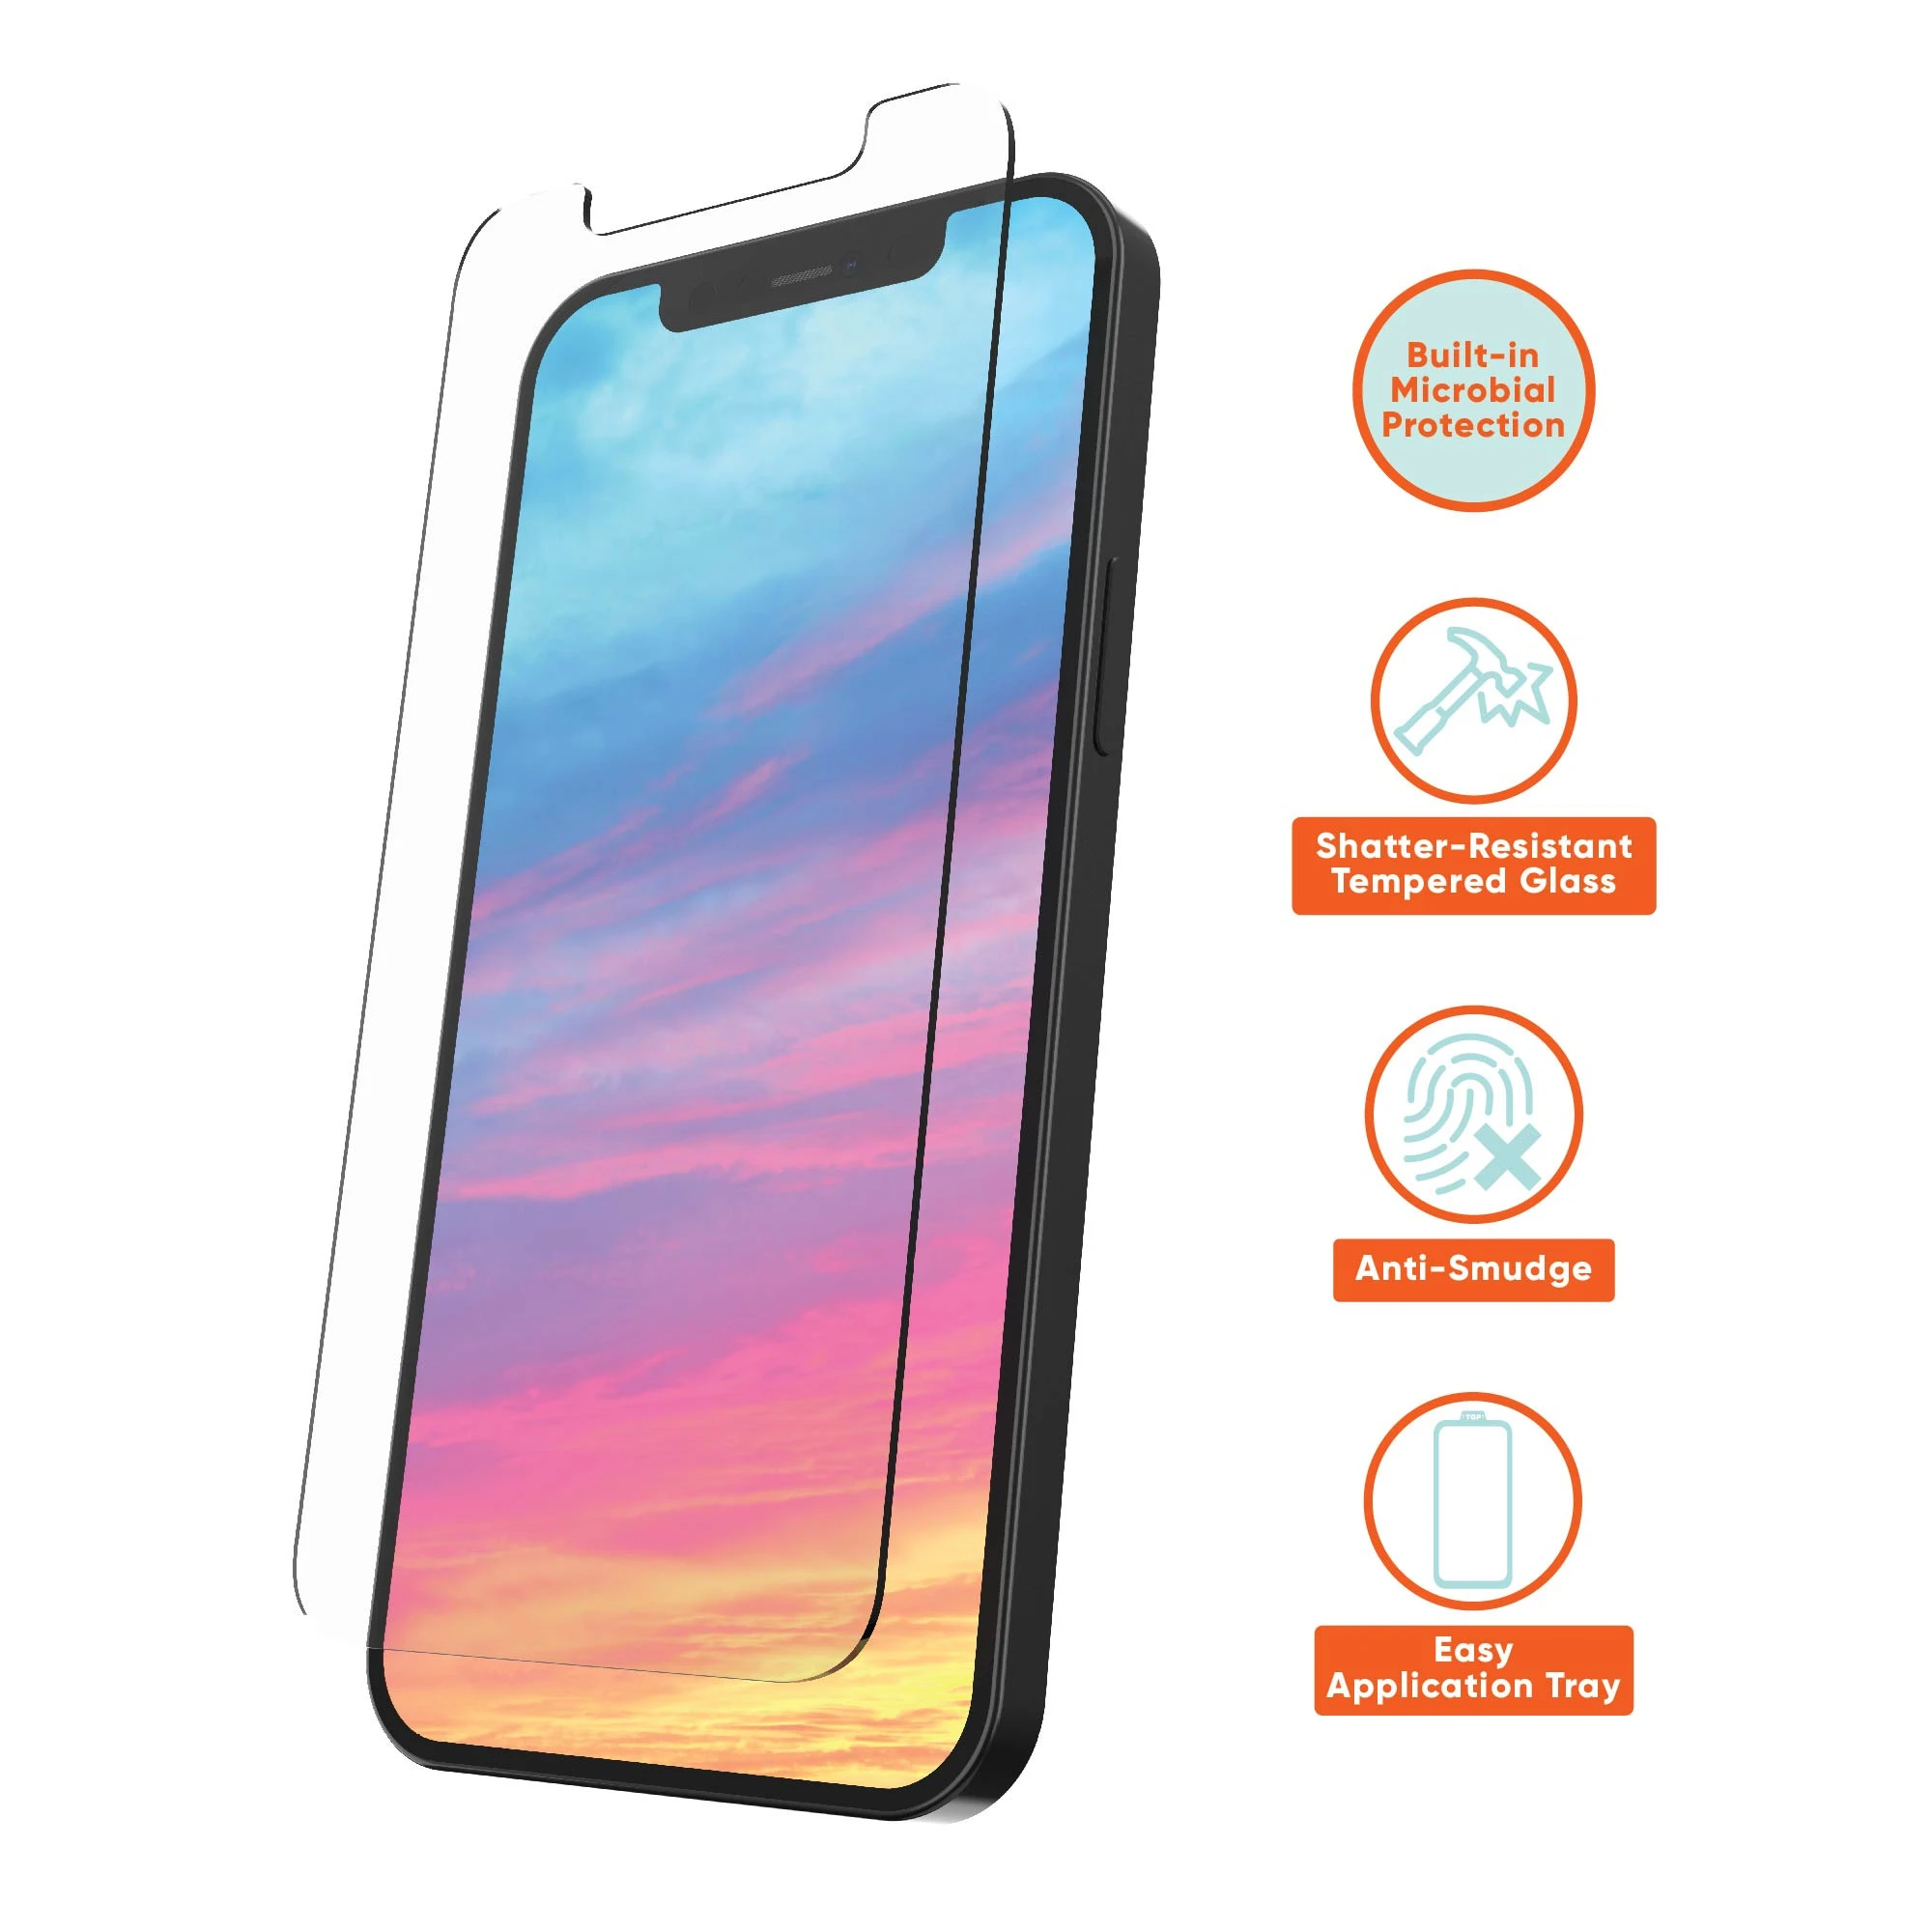 2020 Hot Selling 2.5D 9H Mobile Phone Tempered Glass Screen Protector for Iphone 11 12 Pro Max